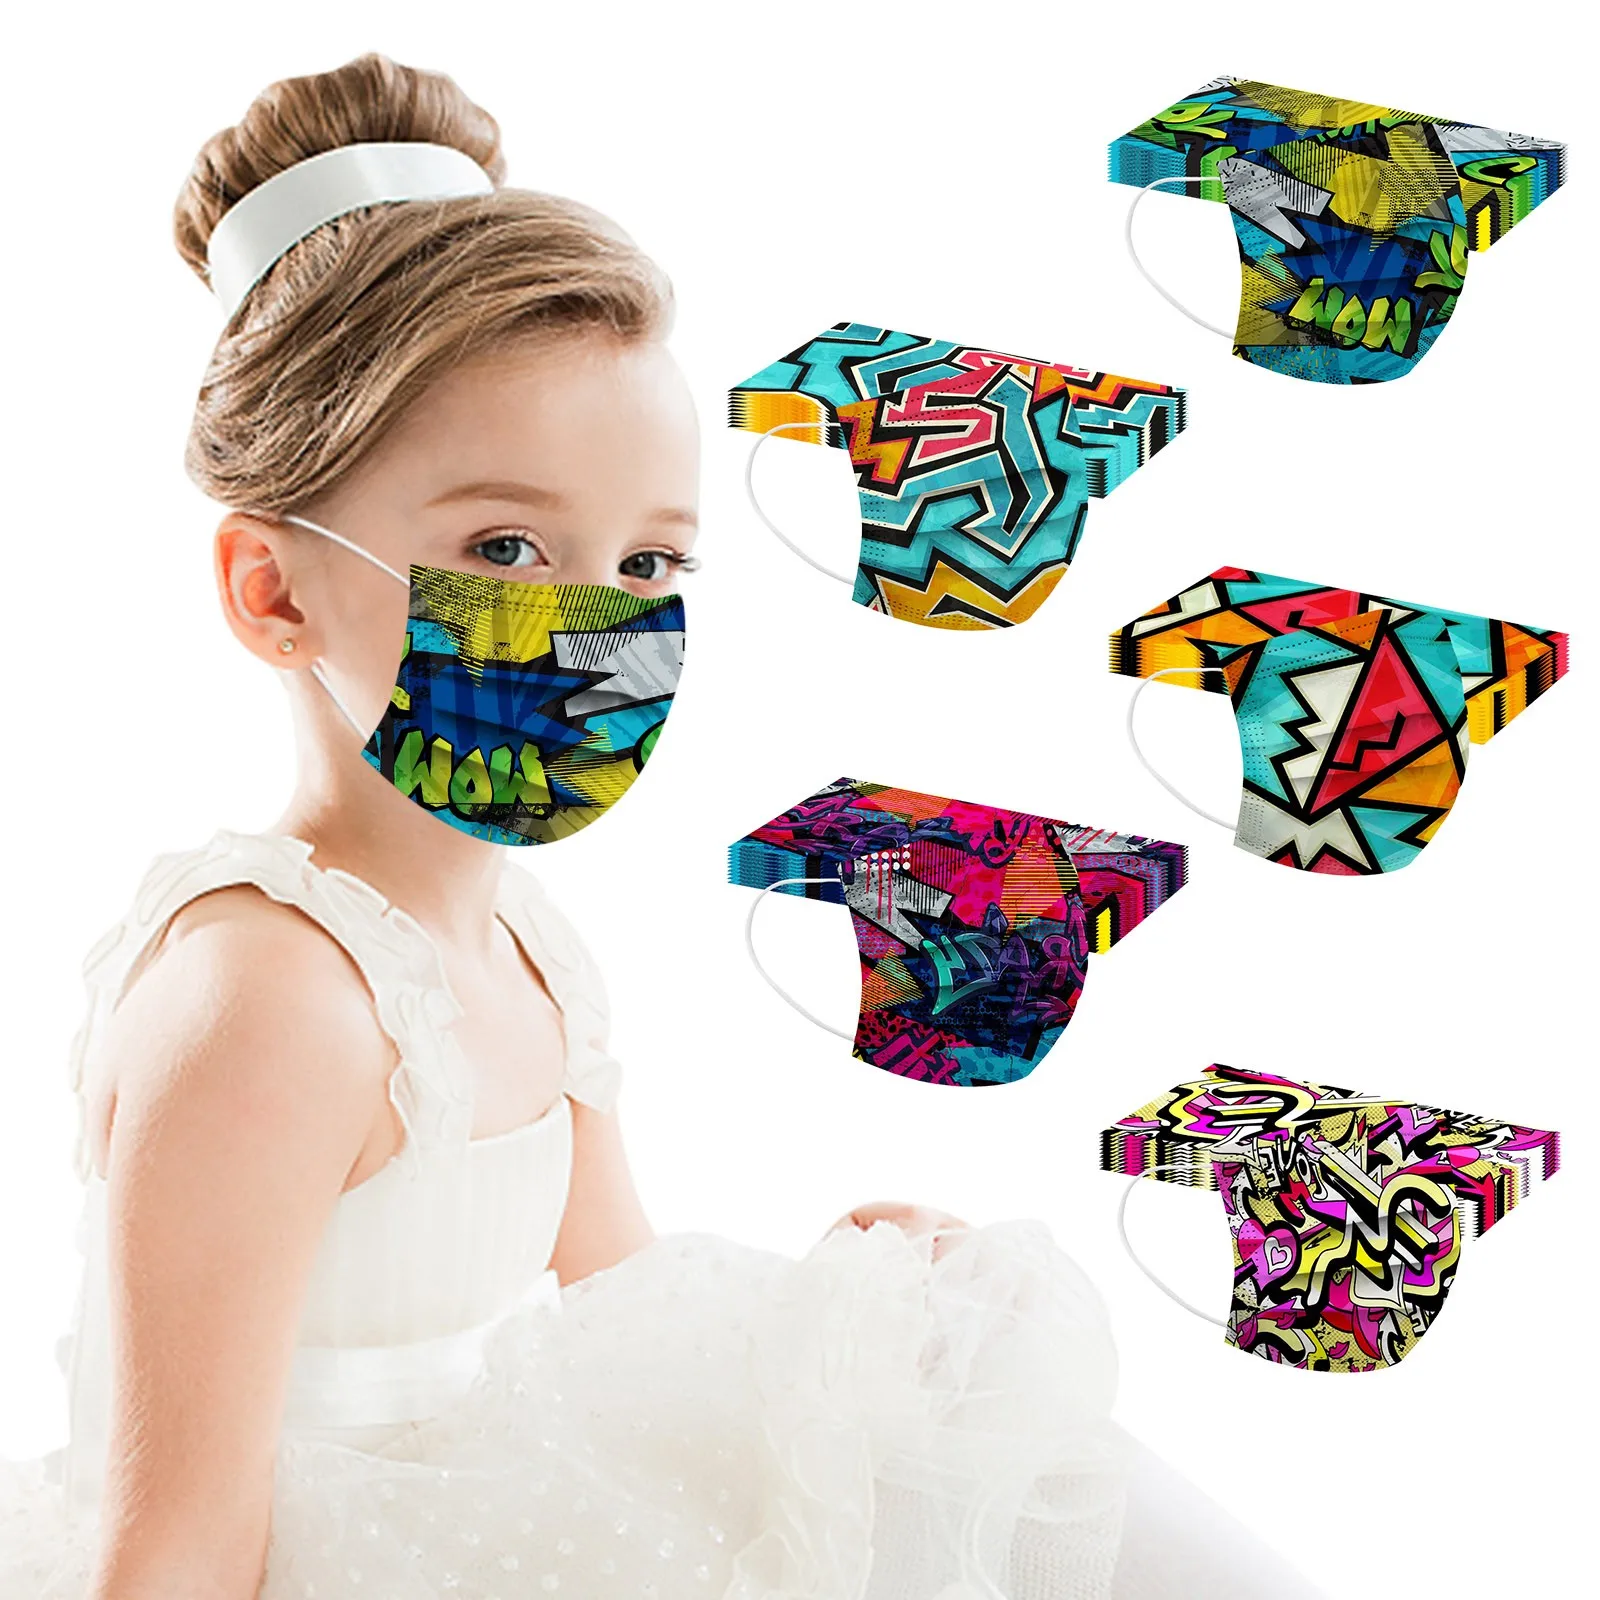 Buy 50pc Children's Mask Anime Graffiti Printing Disposable Face Child Kids 3ply Thick Breathable Mascarillas Niño on